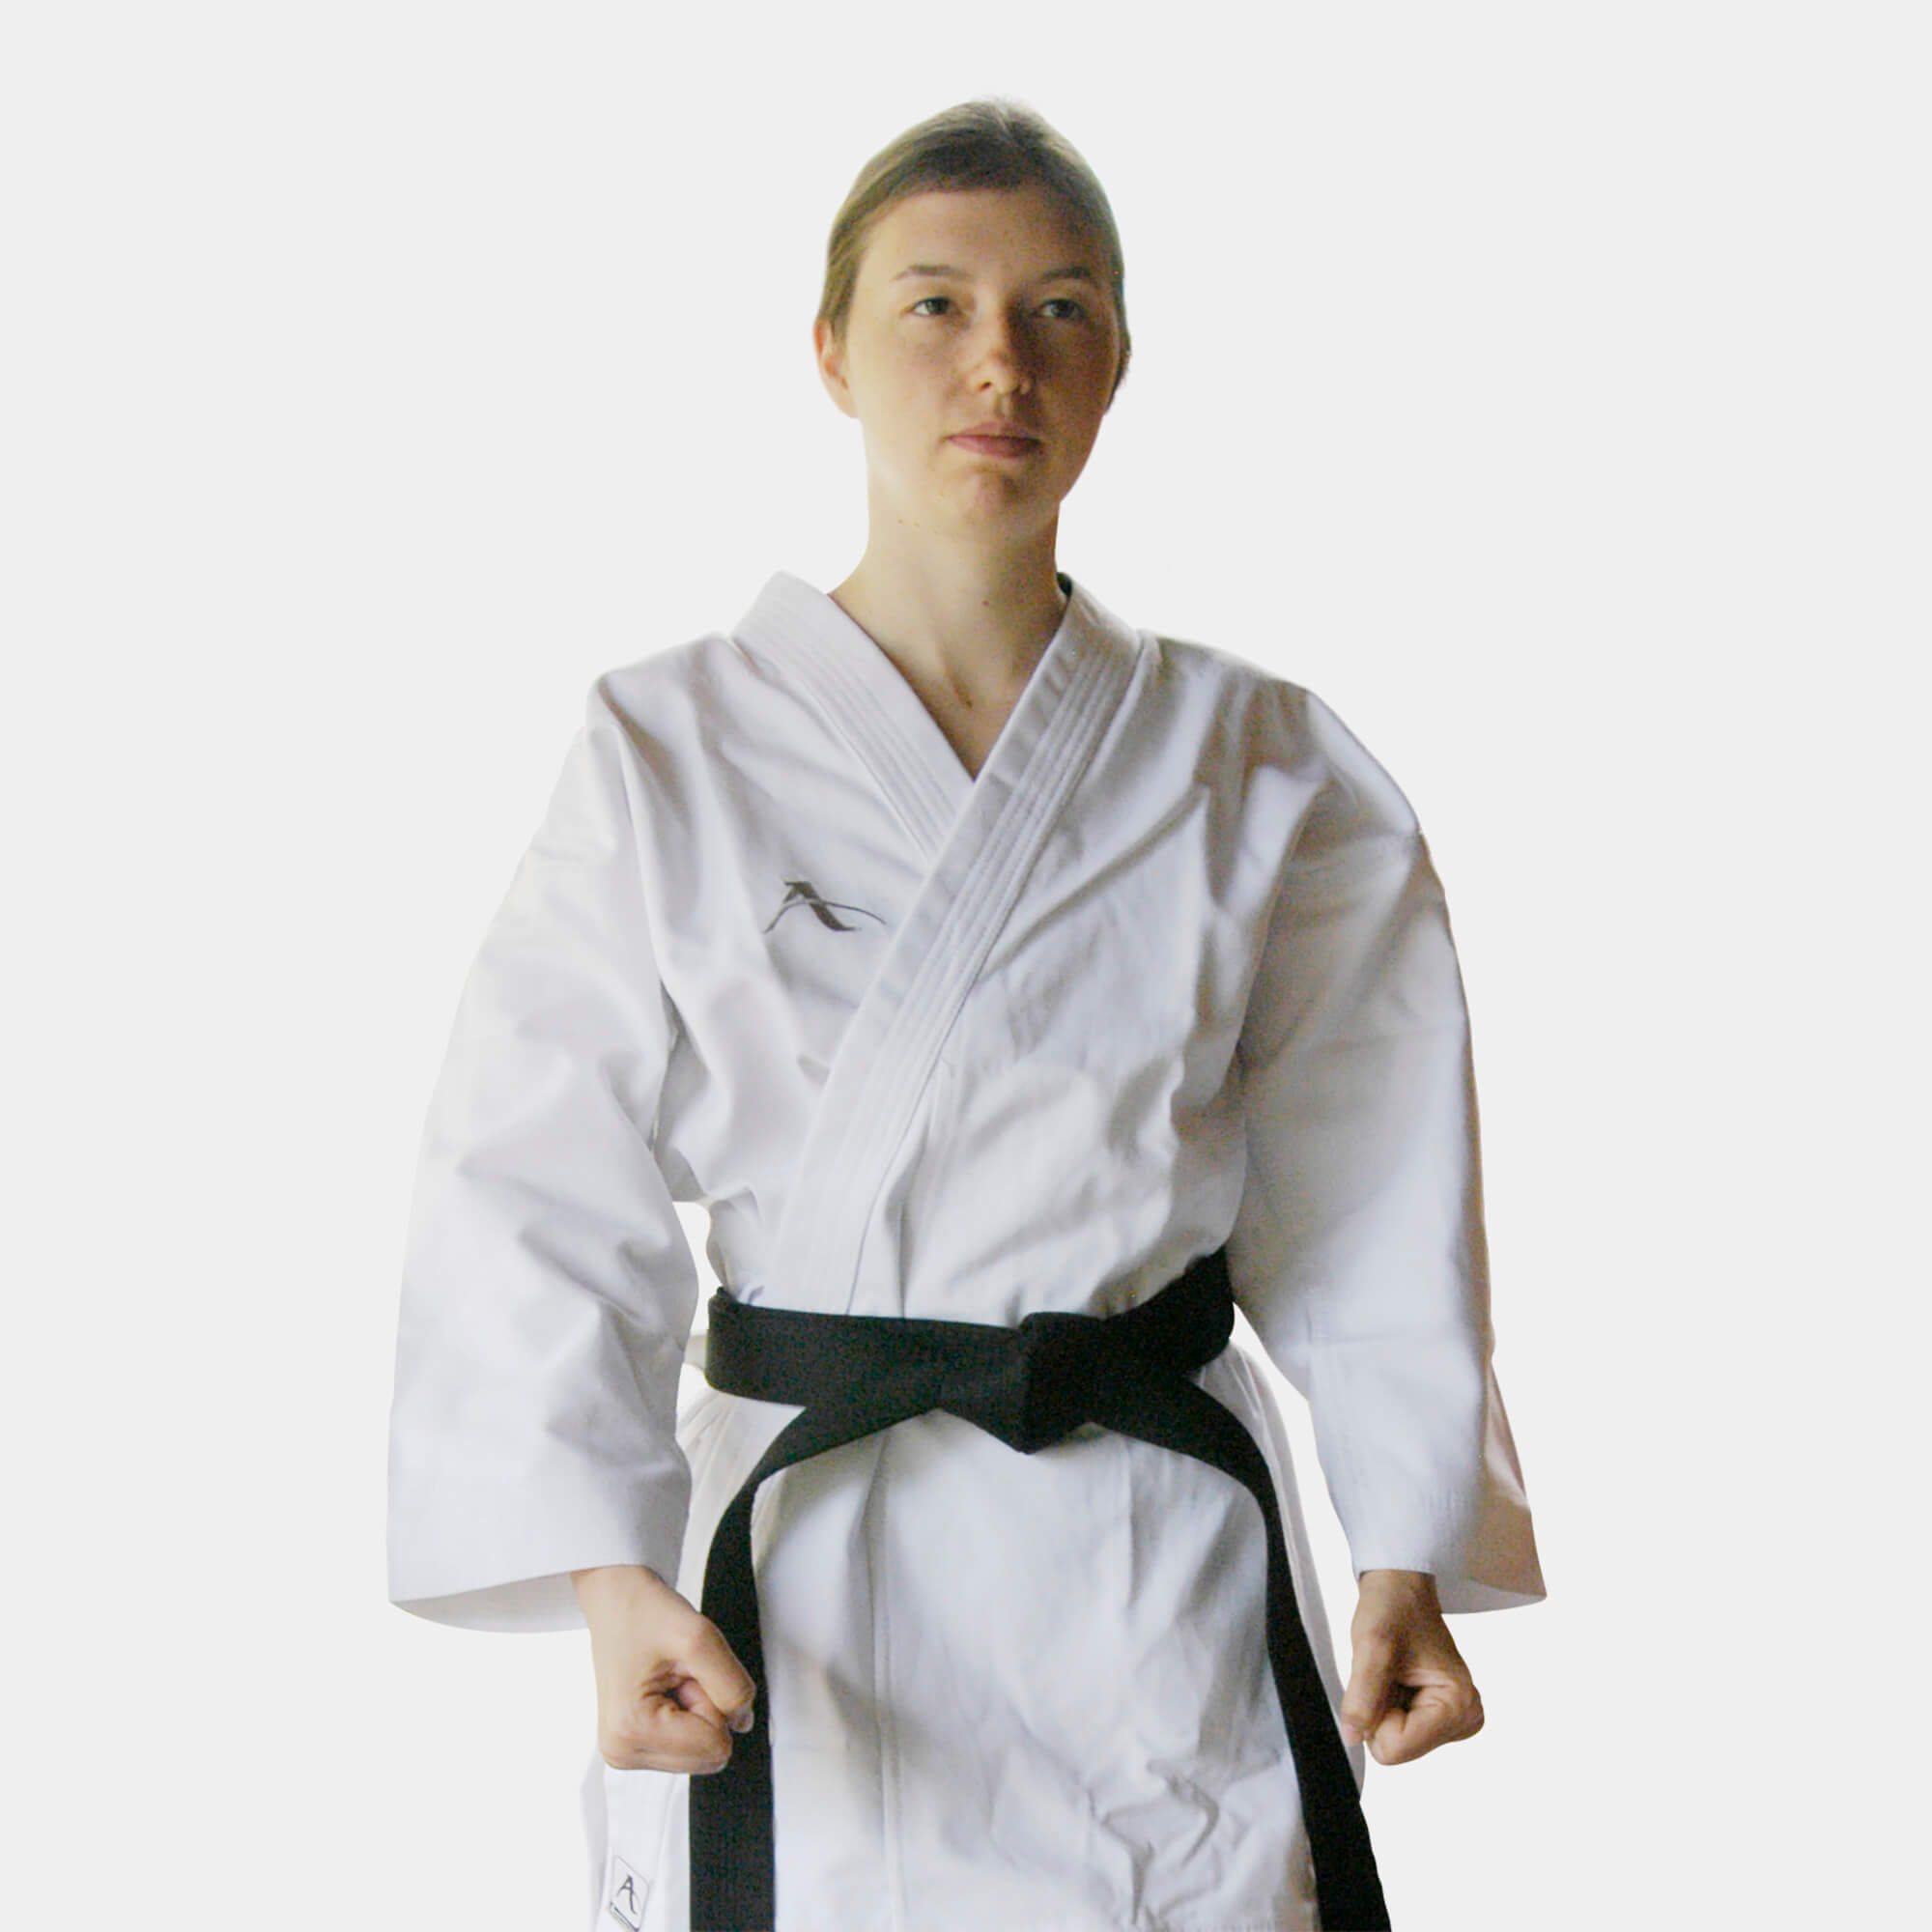 Arawaza KATA DELUXE Karate Suit Gi MARTIAL ARTS 12oz WKF APPROVED 